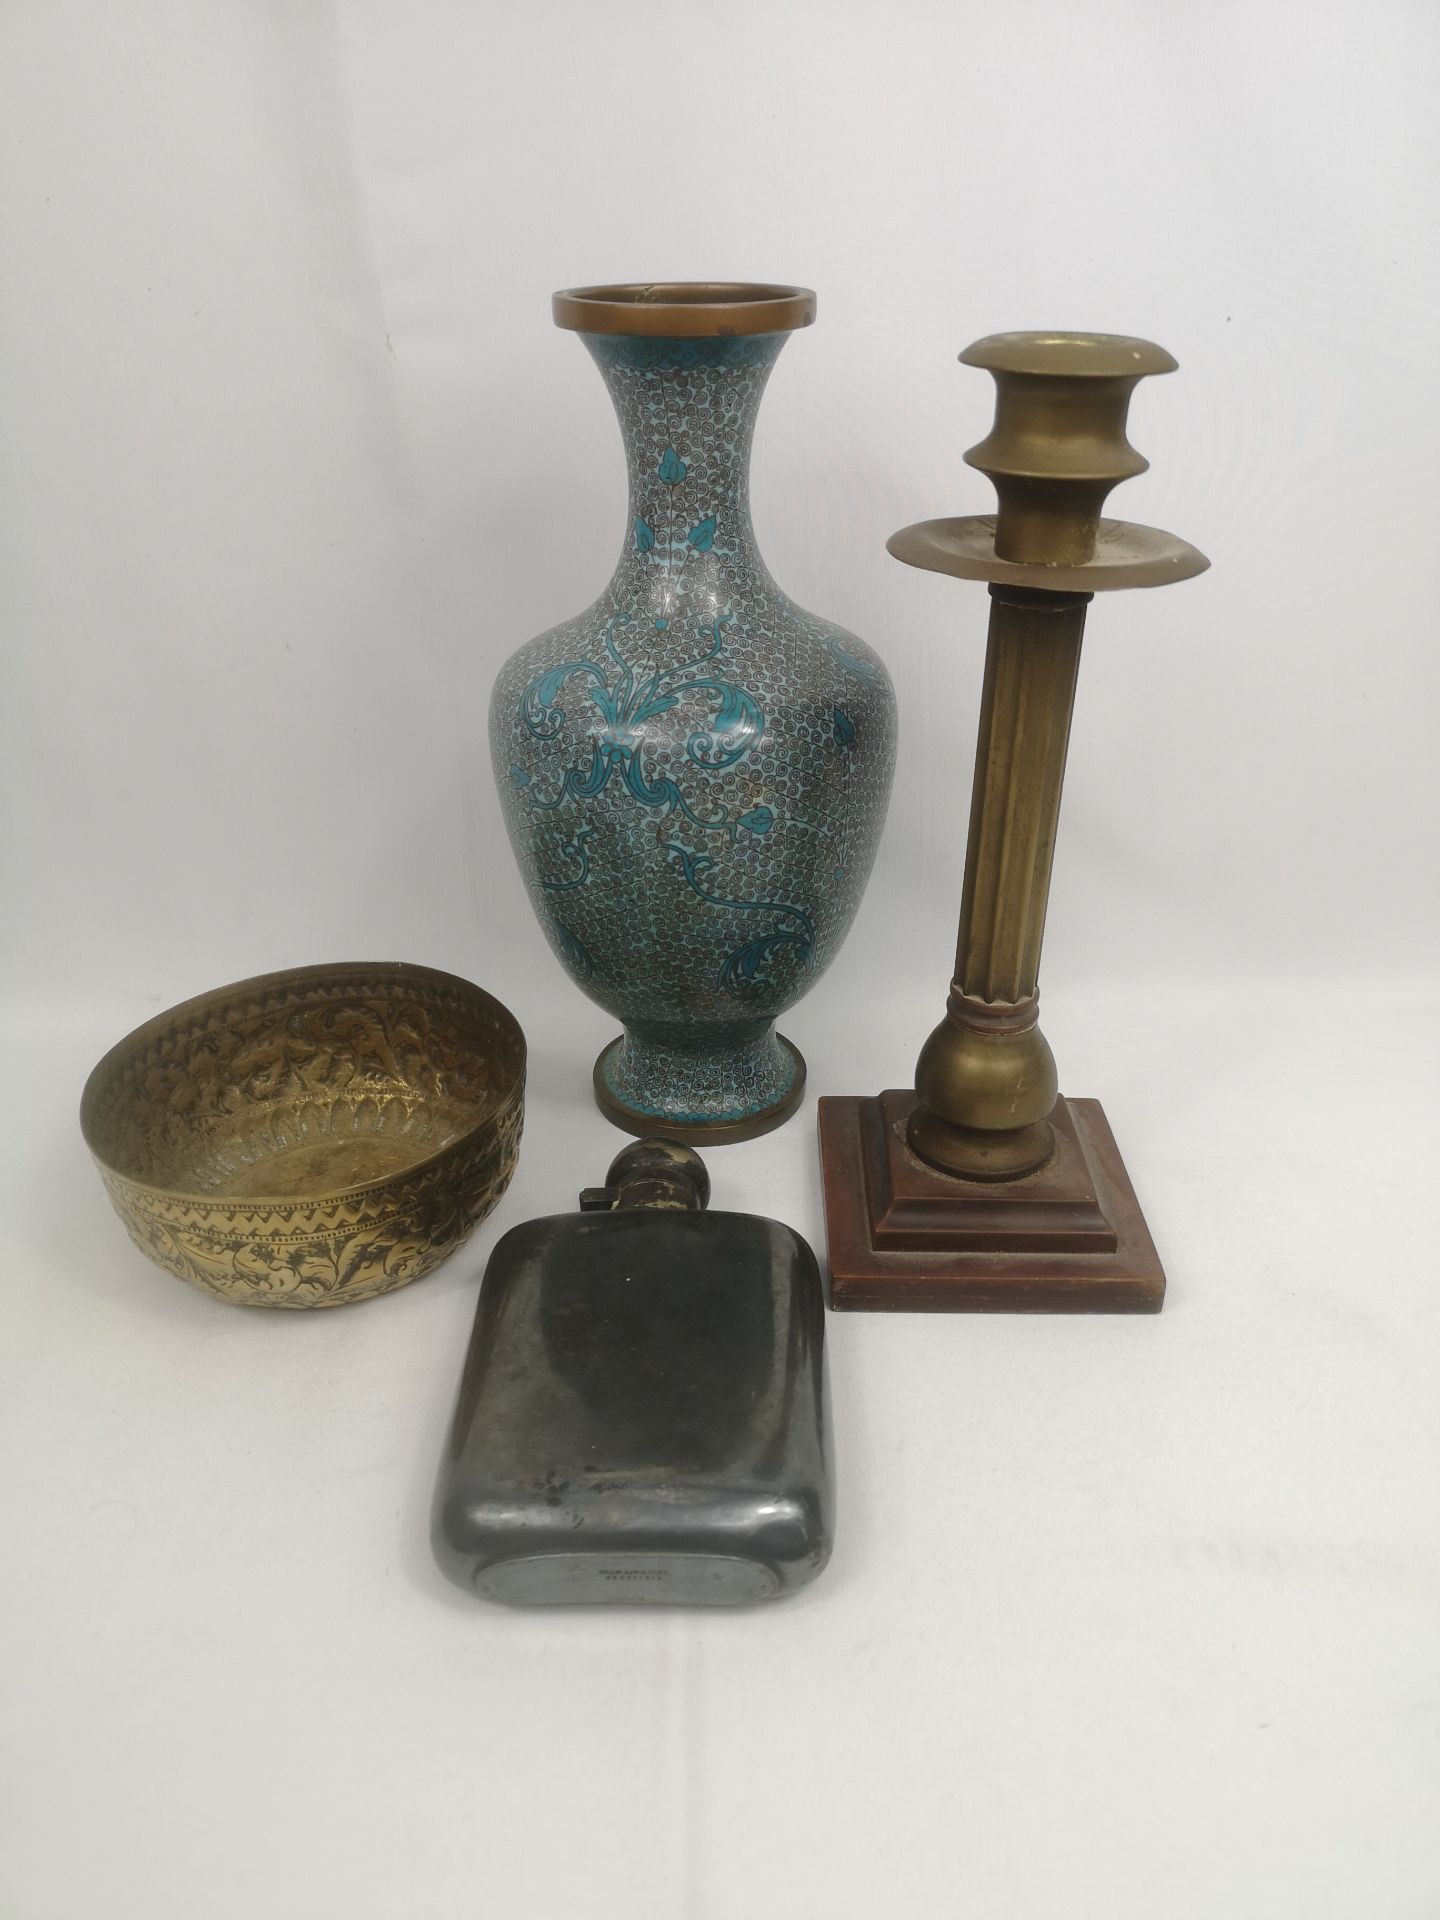 Cloisonne vase and other items